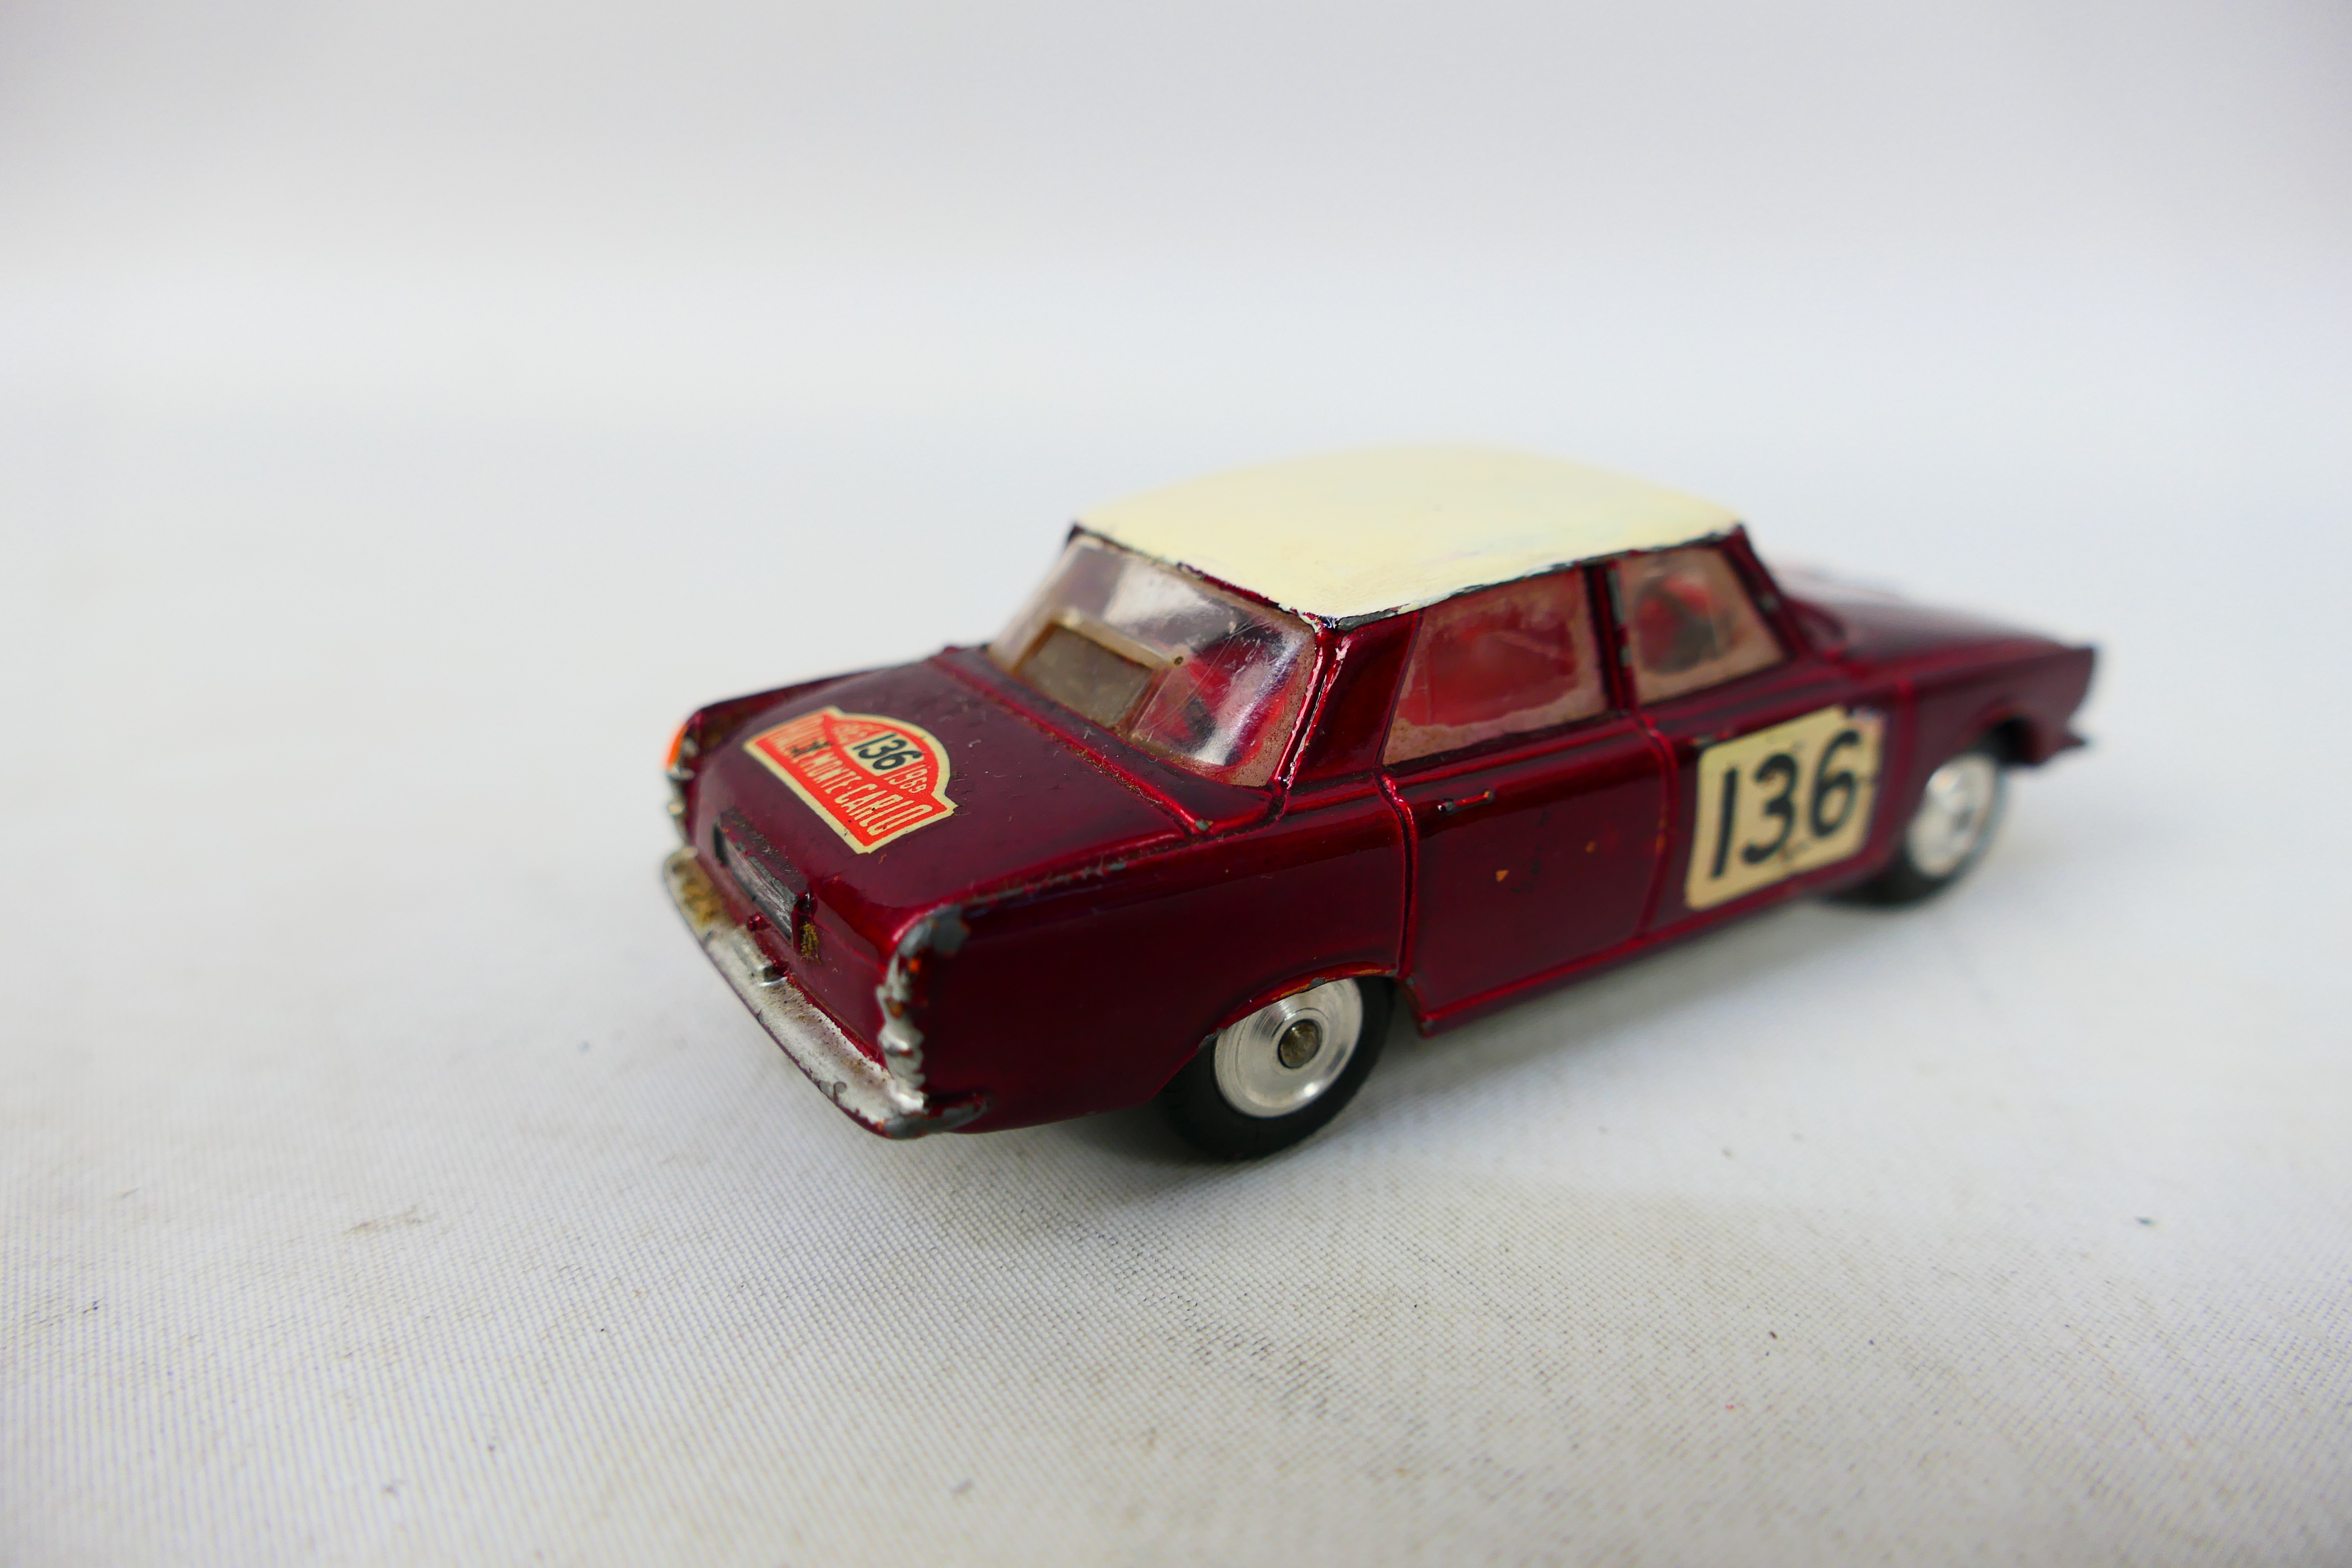 Corgi Toys - Three unboxed diecast model cars from the Corgi Toys 'Rally Monte Carlo' set. - Image 9 of 11